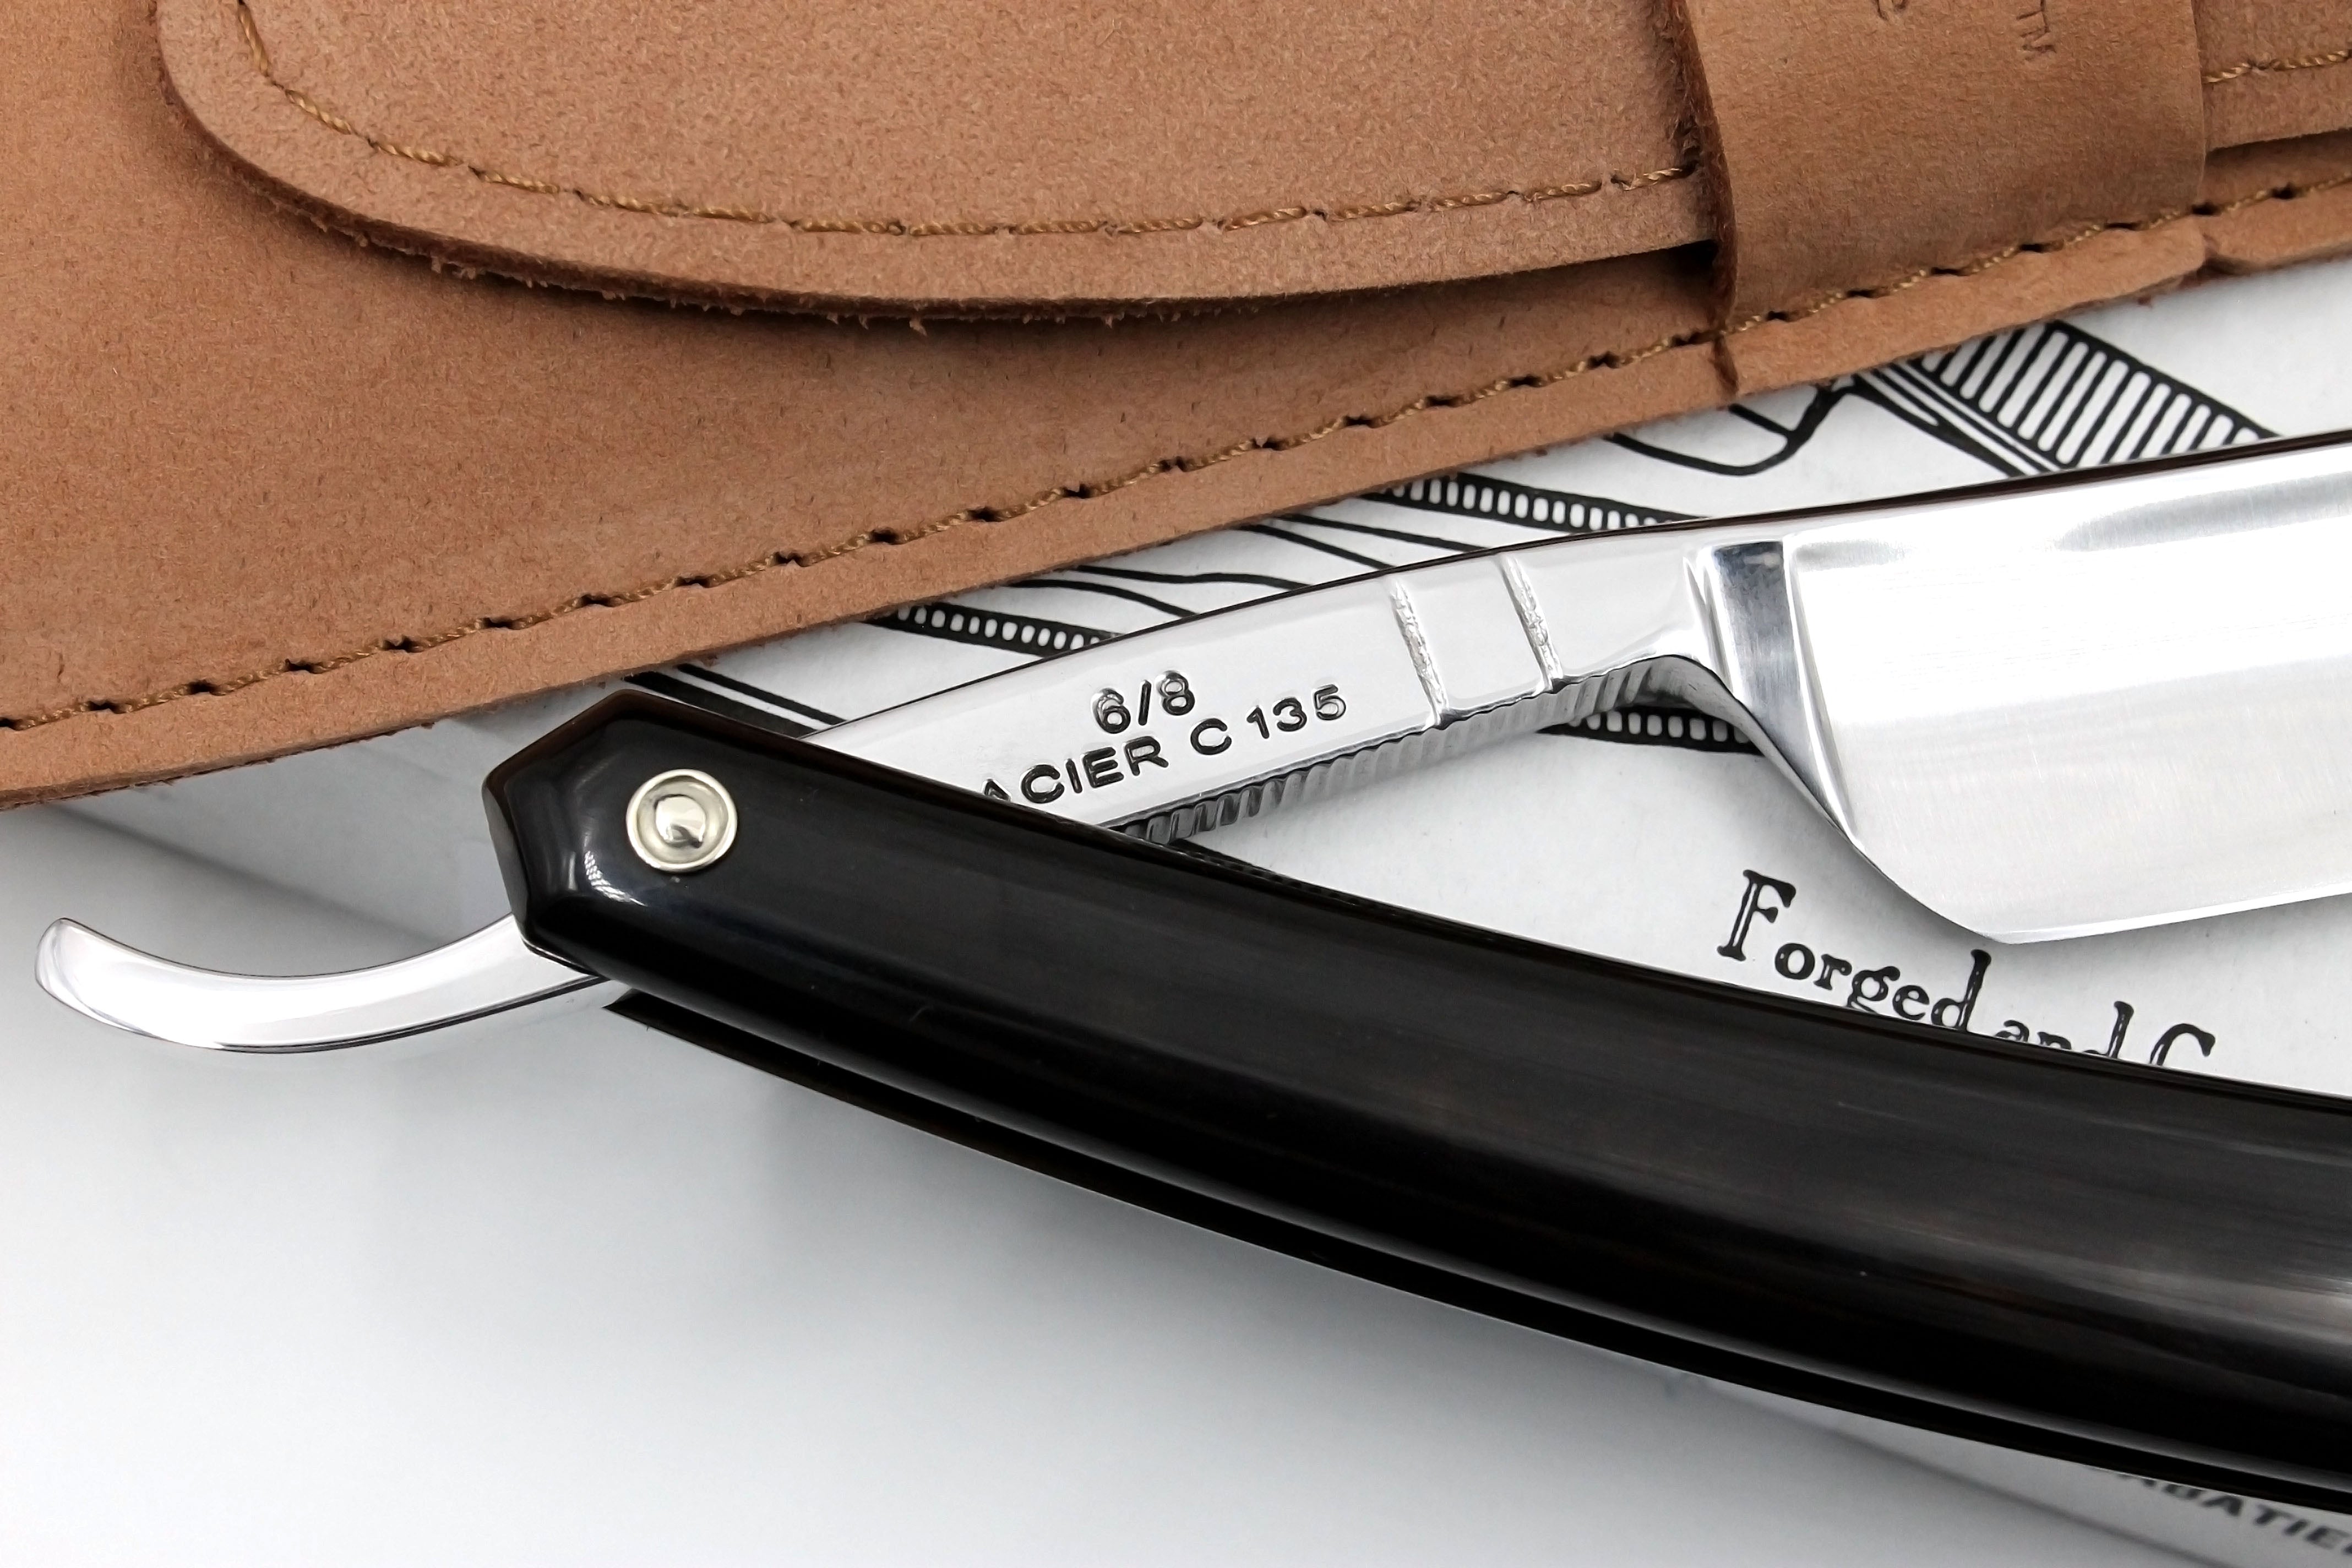 Thiers Issard 6/8 "Medaille d'or Alger" Etch - Black Horn Scales - Full Hollow Straight Razor